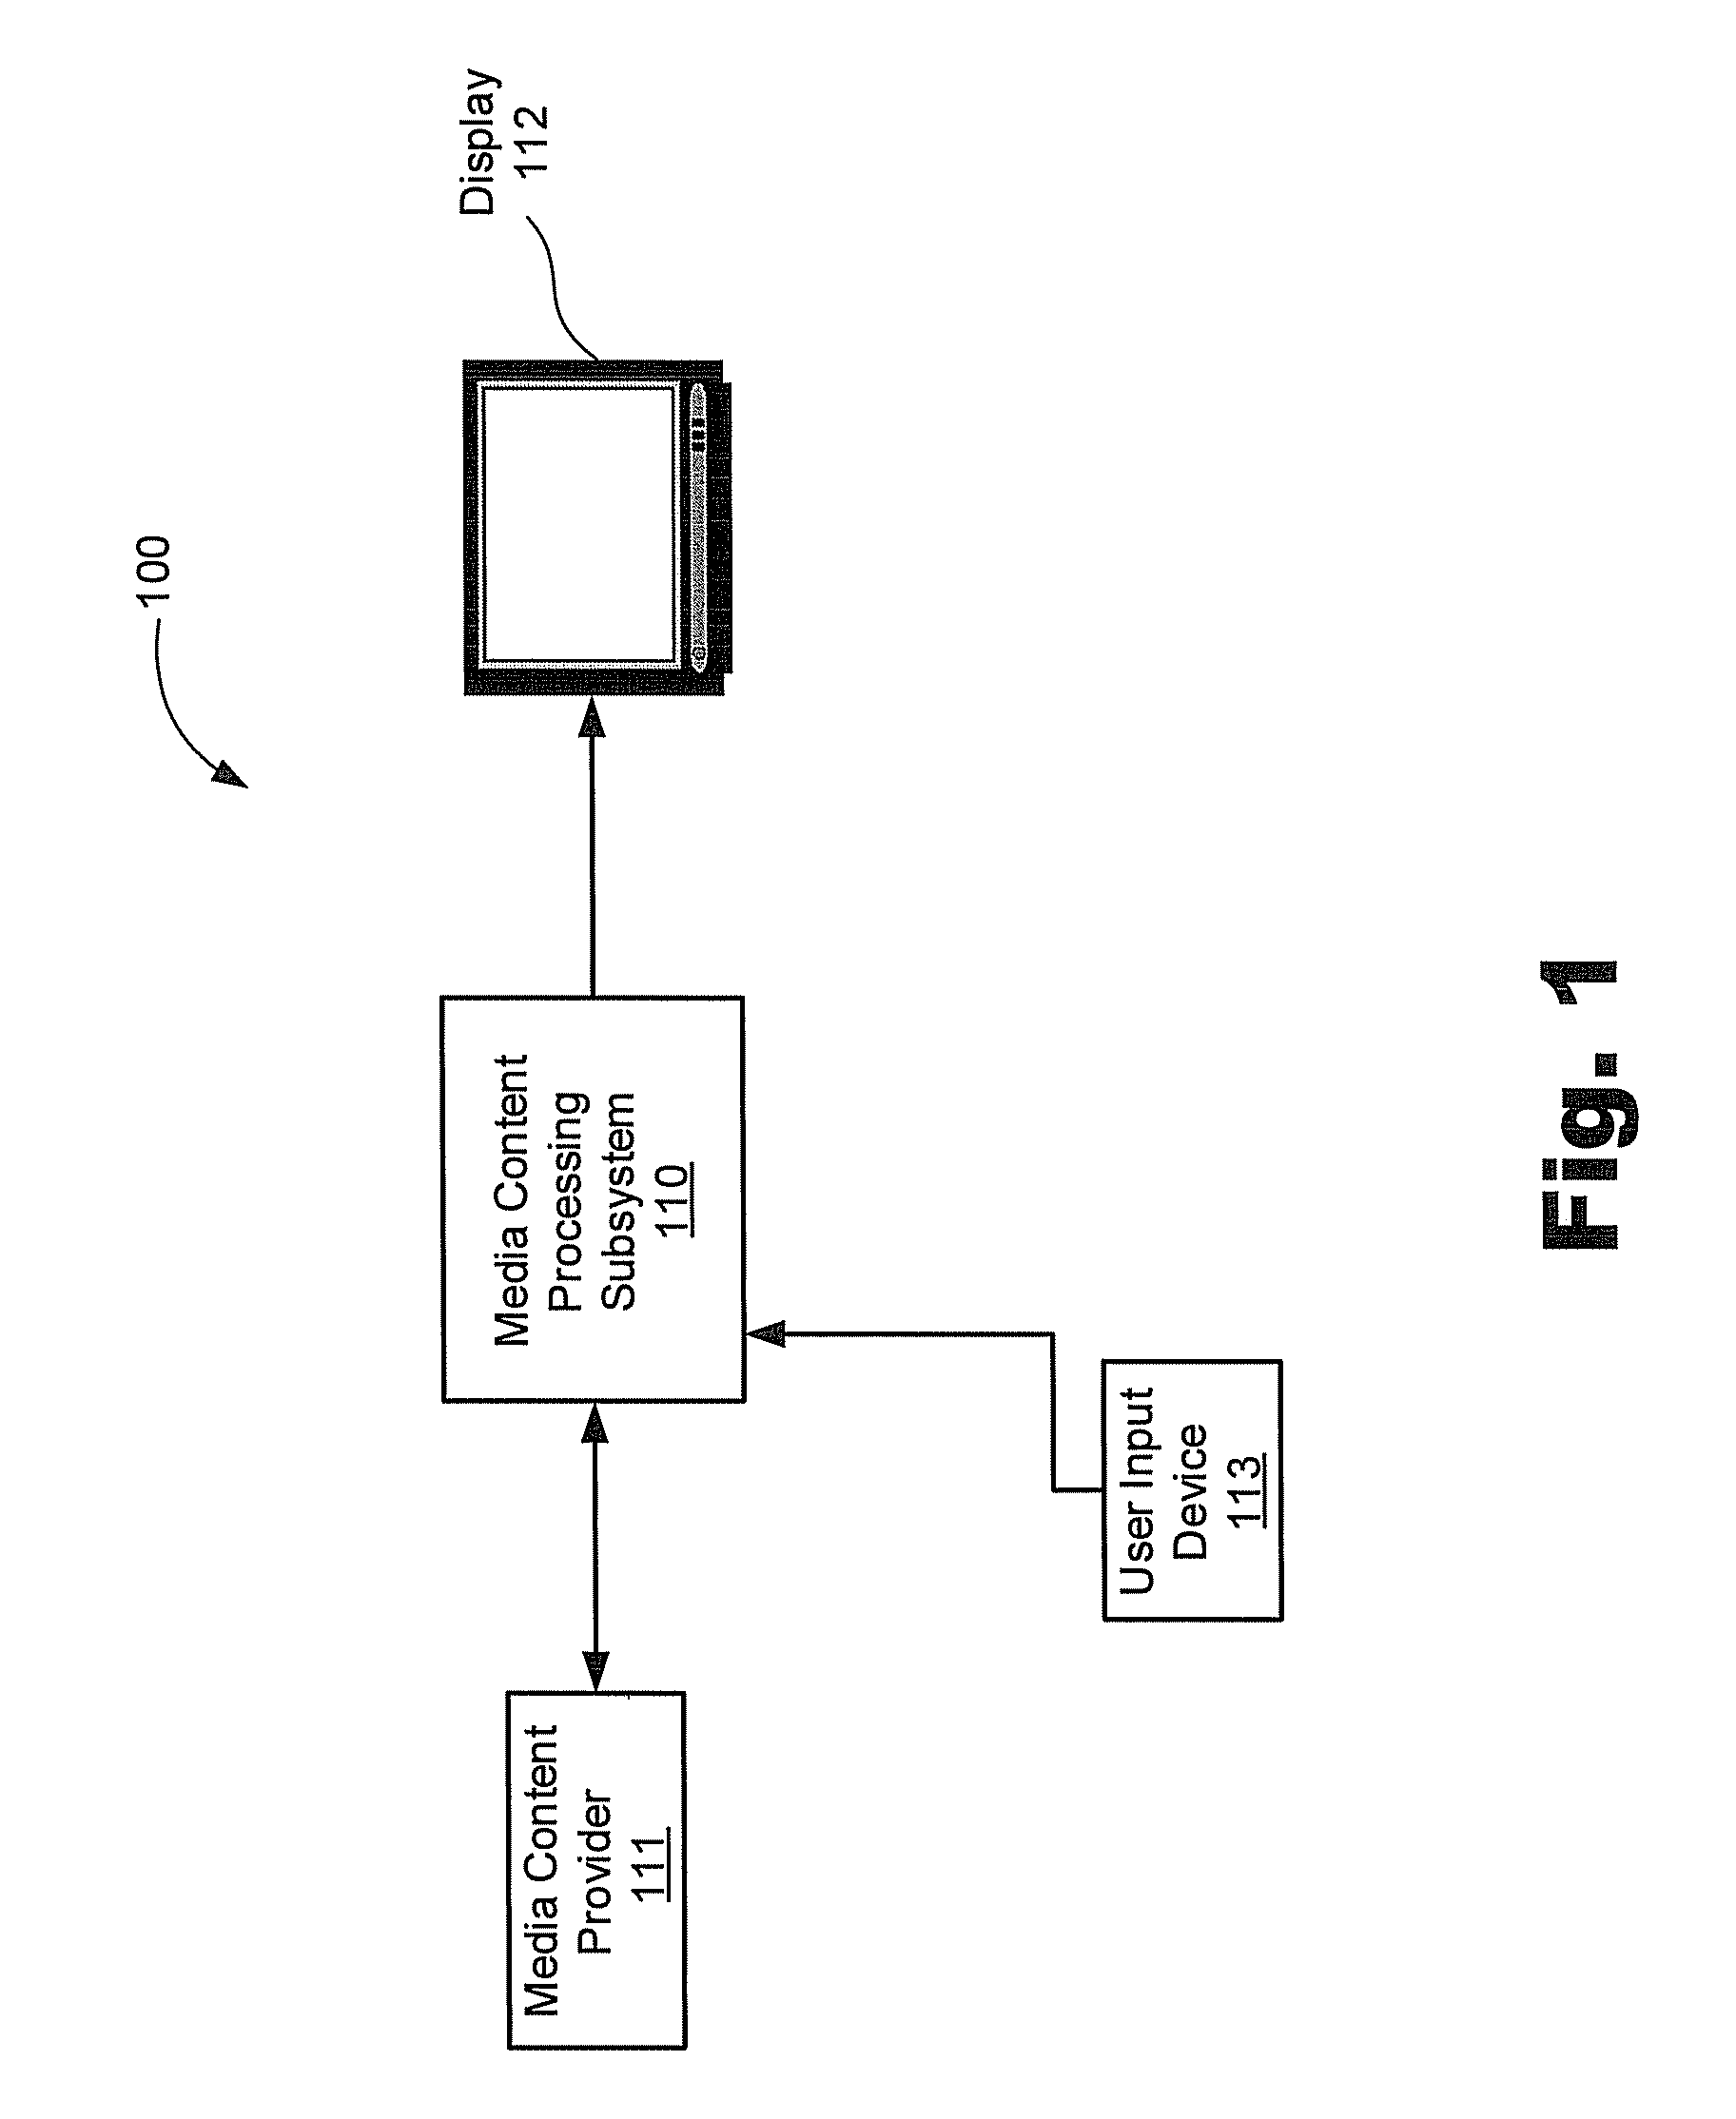 Program guide navigation tools for media content access systems and methods